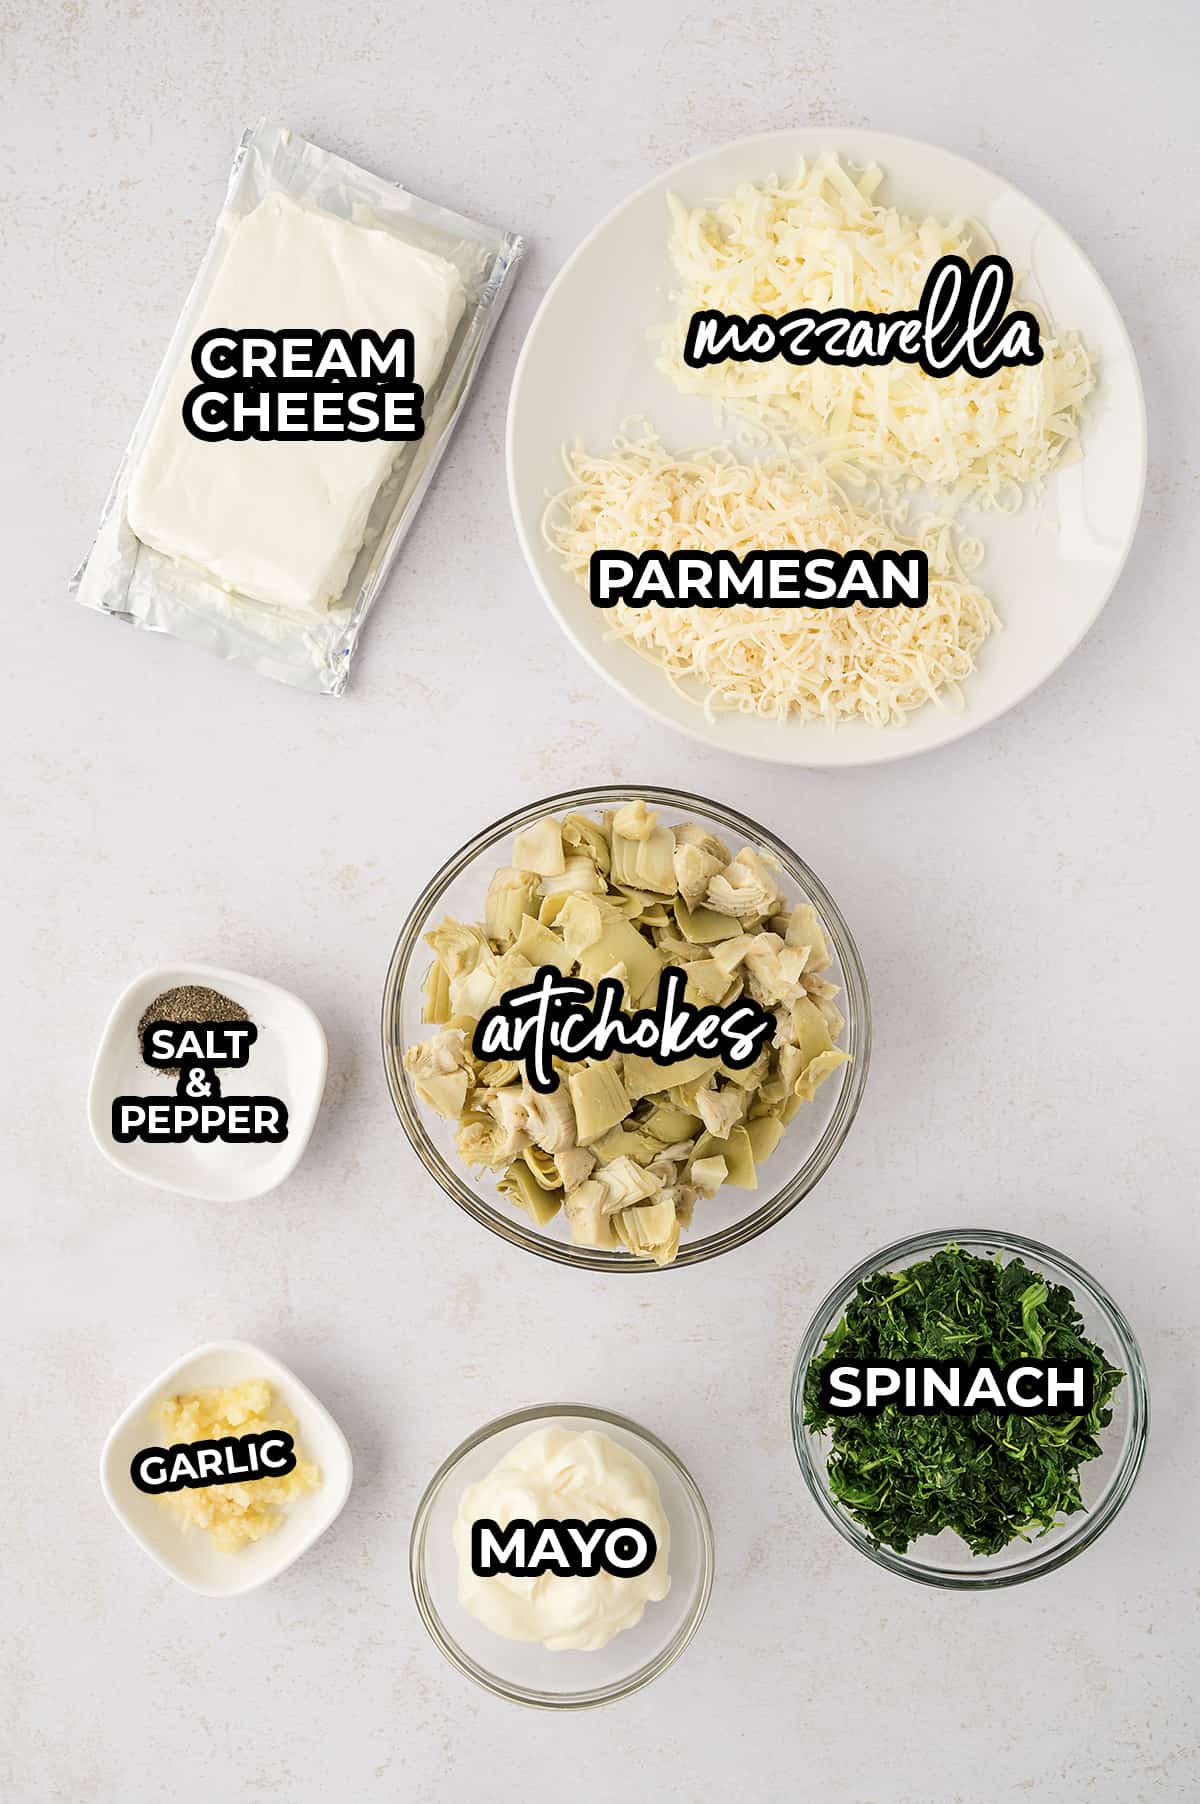 Ingredients for spinach artichoke dip recipe.